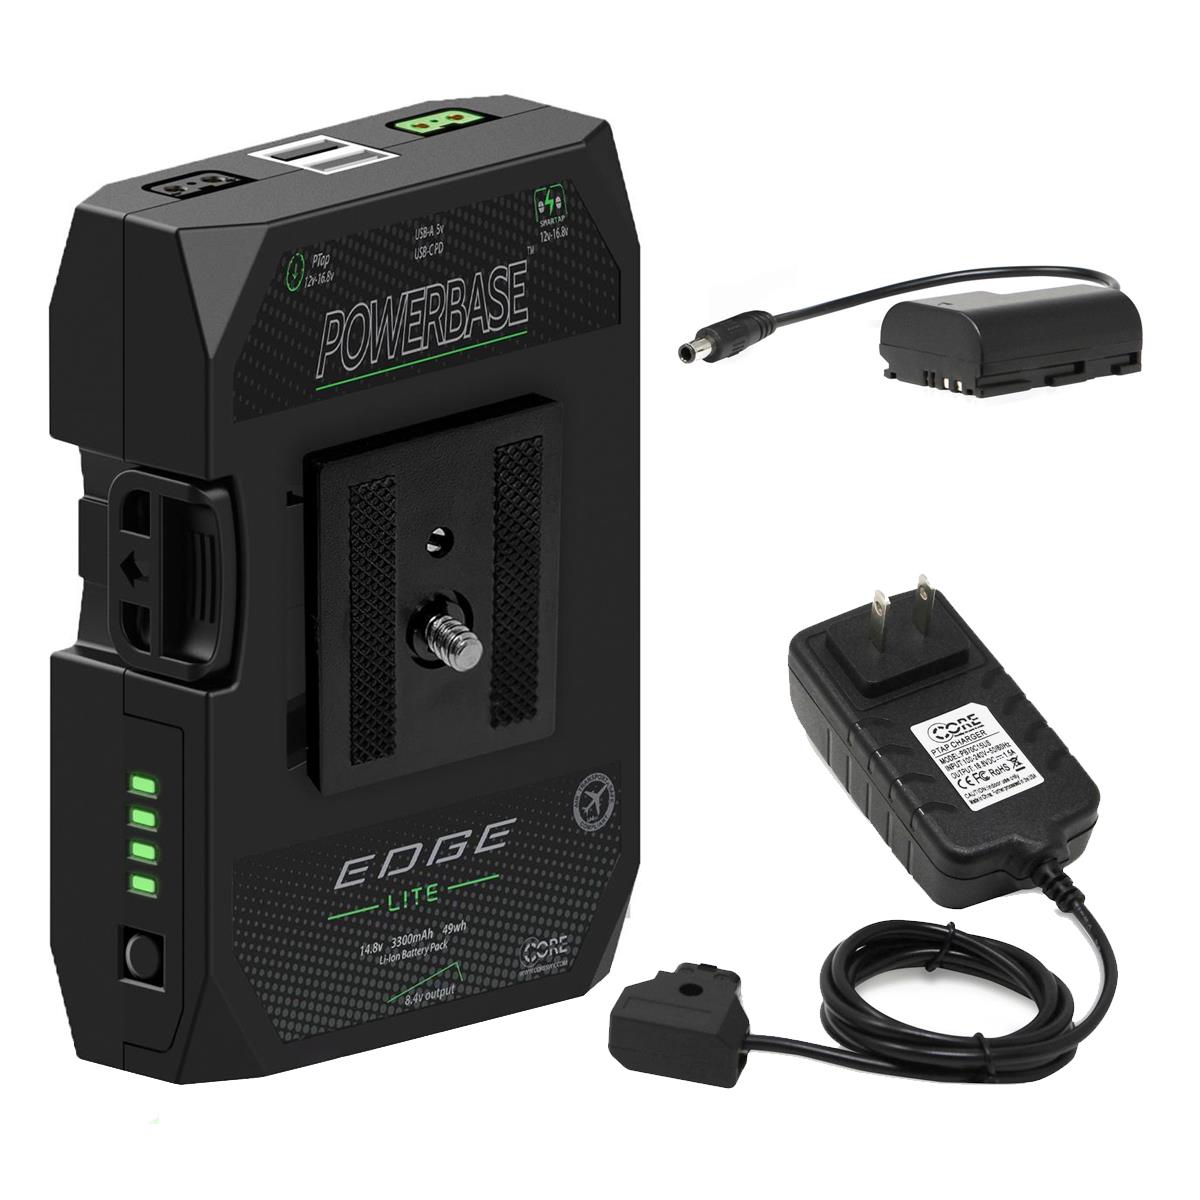 Core SWX PowerBase Edge Lite 49Wh Battery Pack w/Charger, LP-E6 Battery Cable -  PBE-LITE D